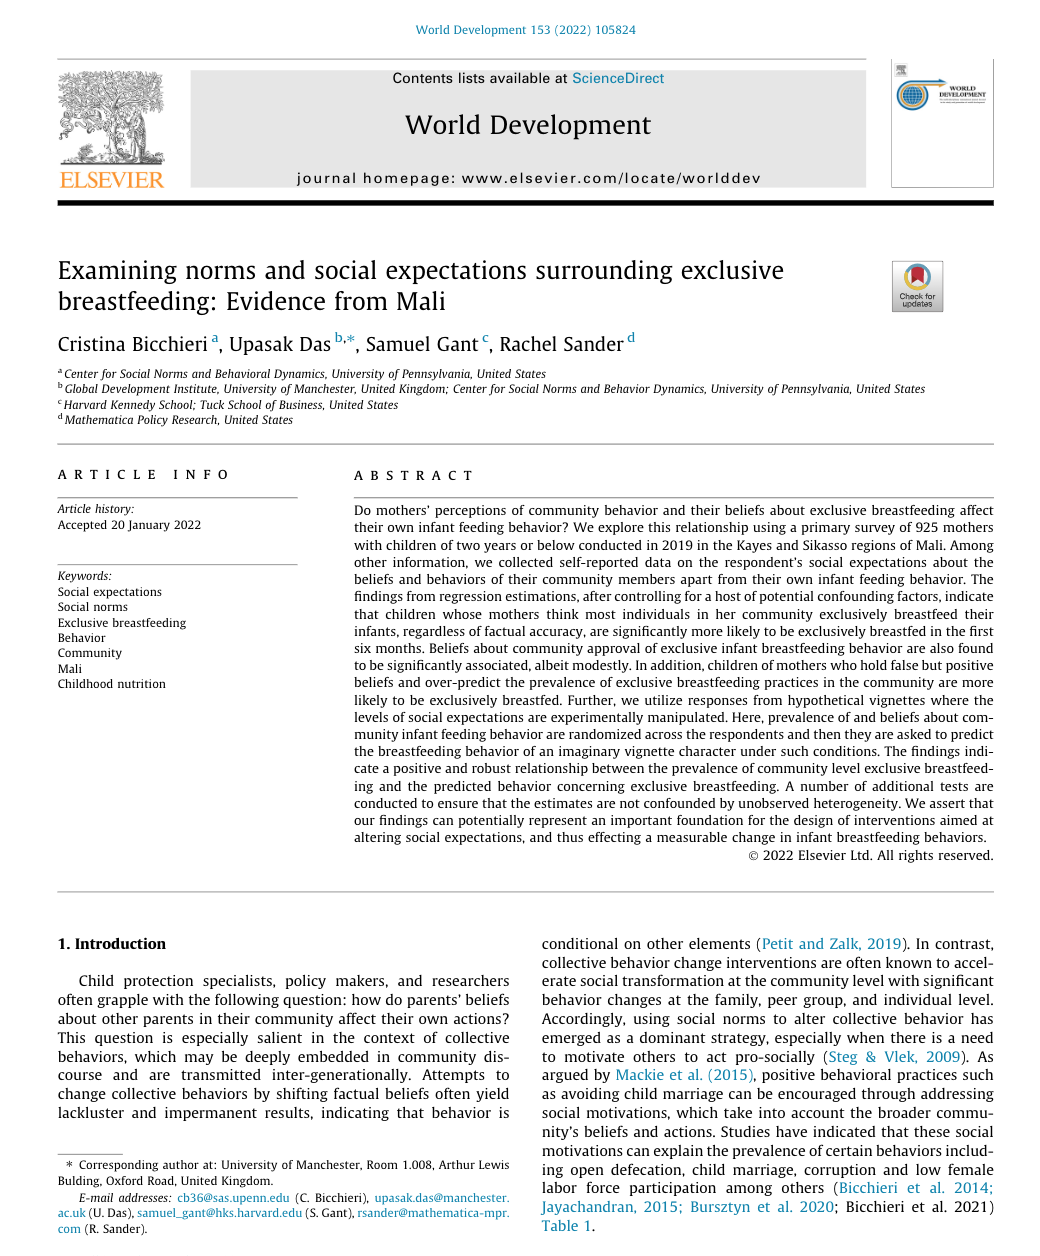 Examining norms and social expectations surrounding exclusive breastfeeding: Evidence from Mali